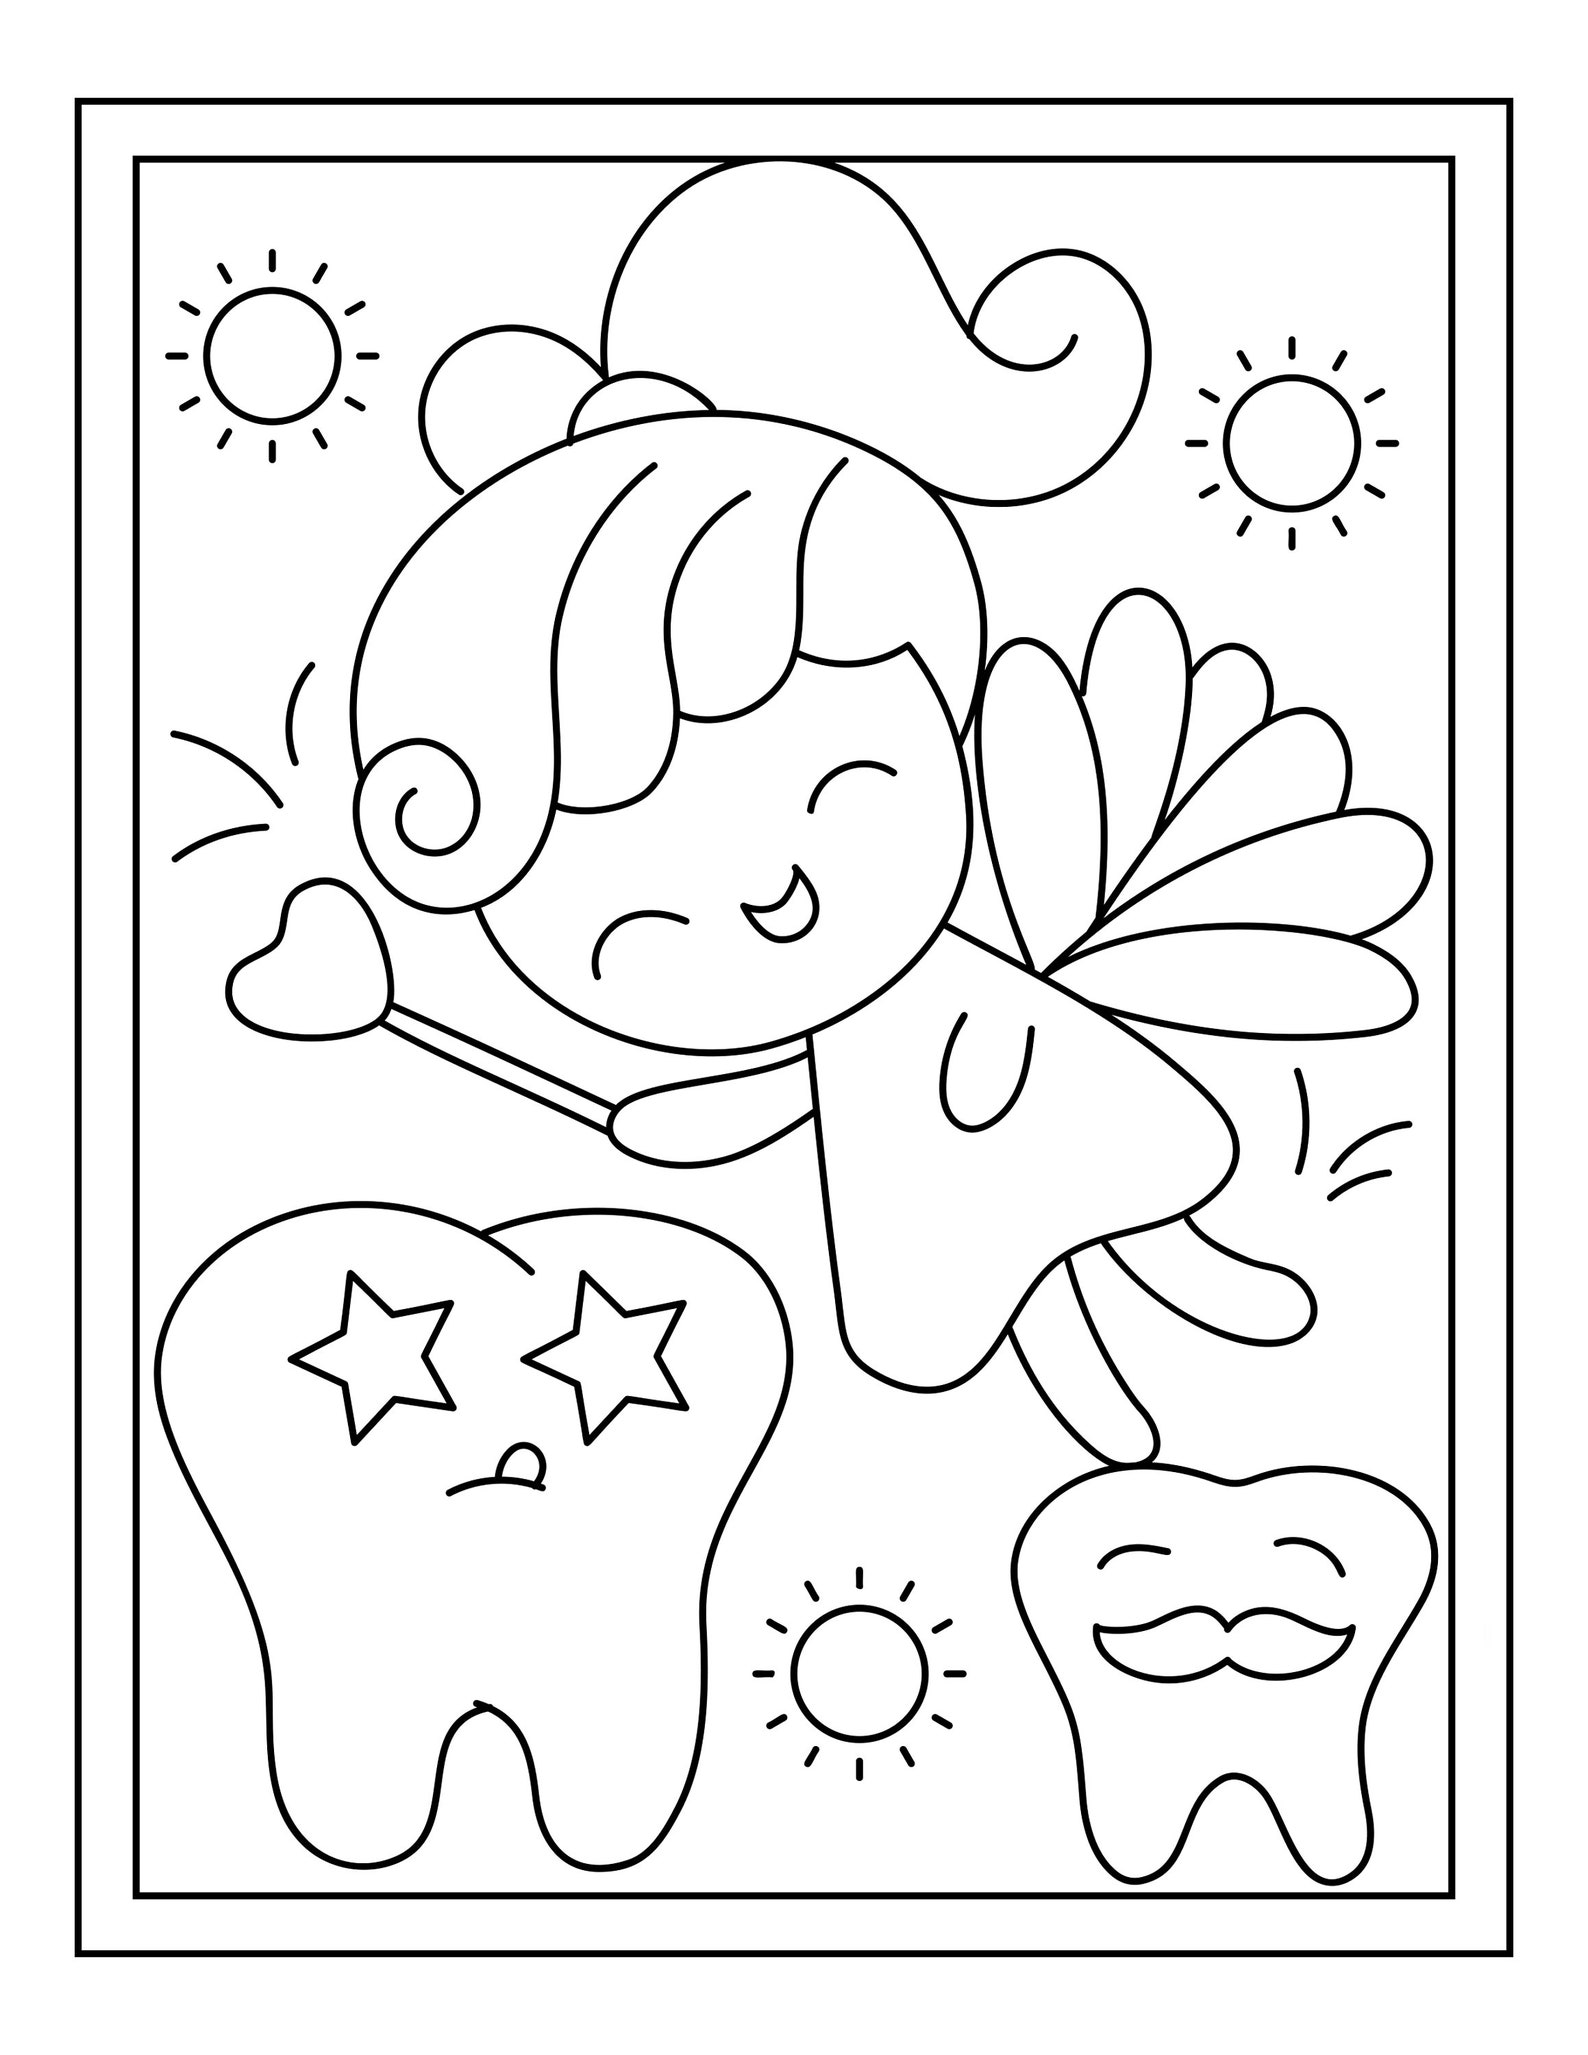 Tooth Fairy Printable 16 Coloring Pages - Etsy